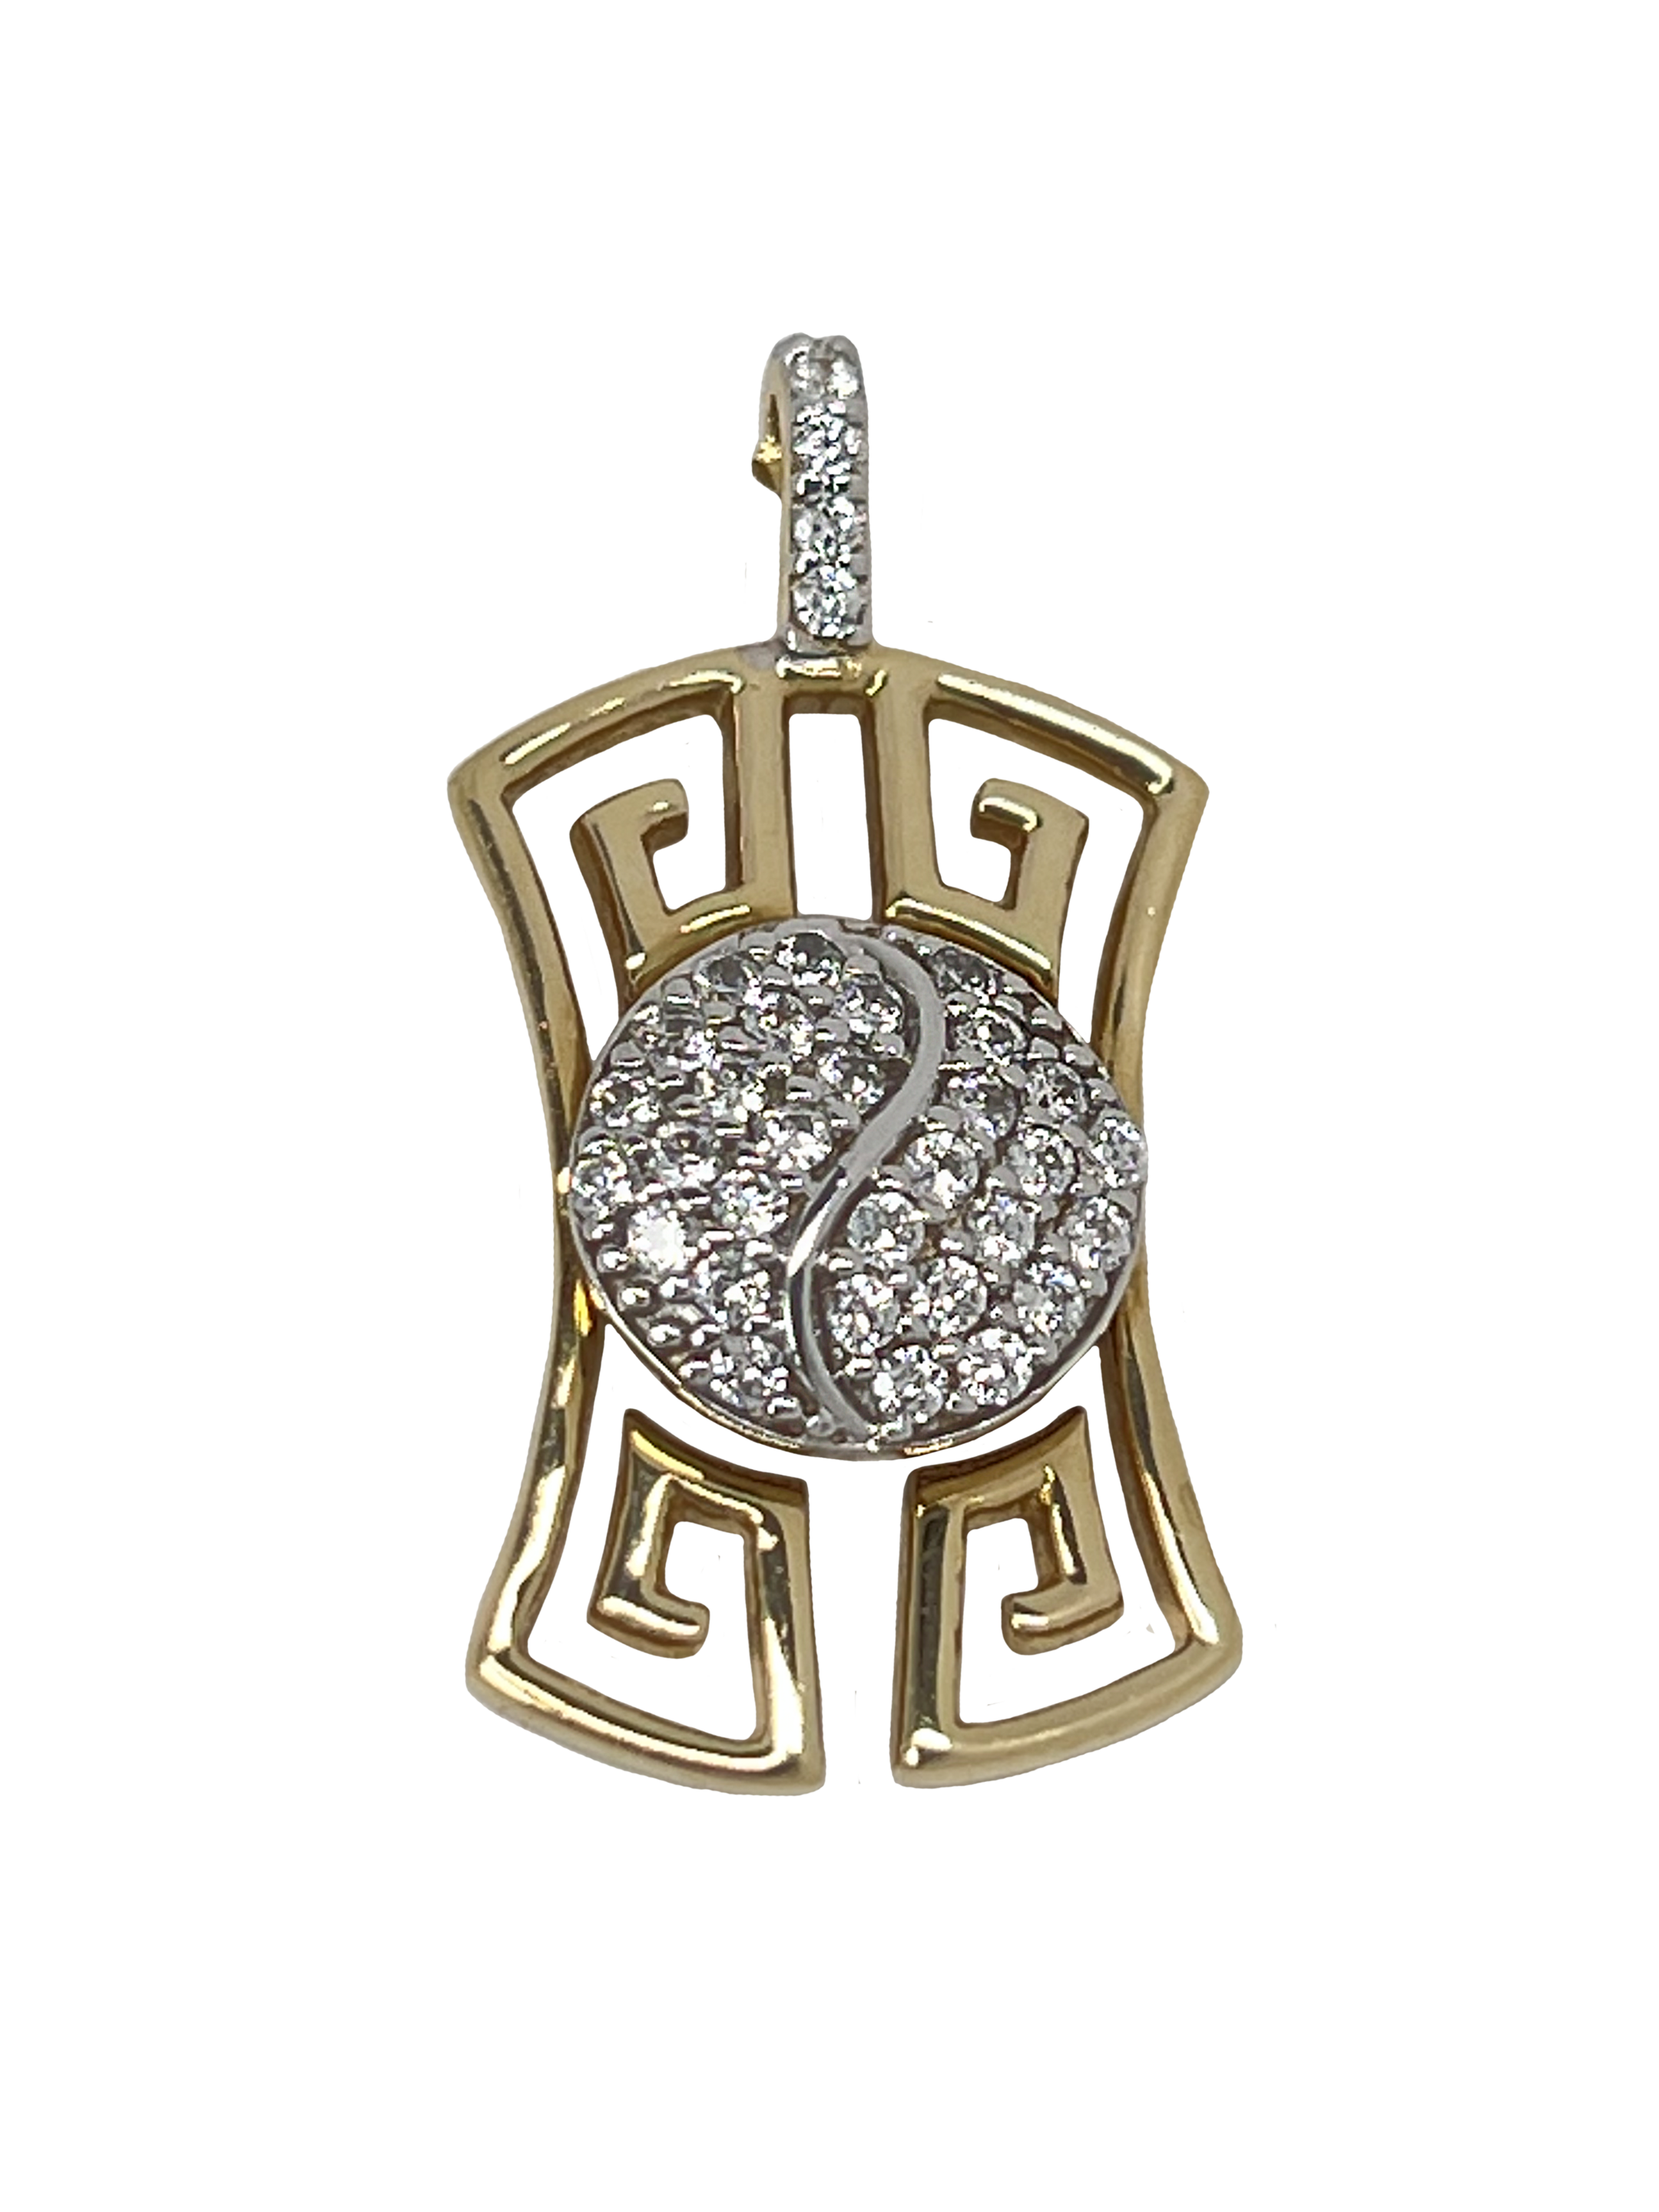 Gold pendant with antique patterns and zircons